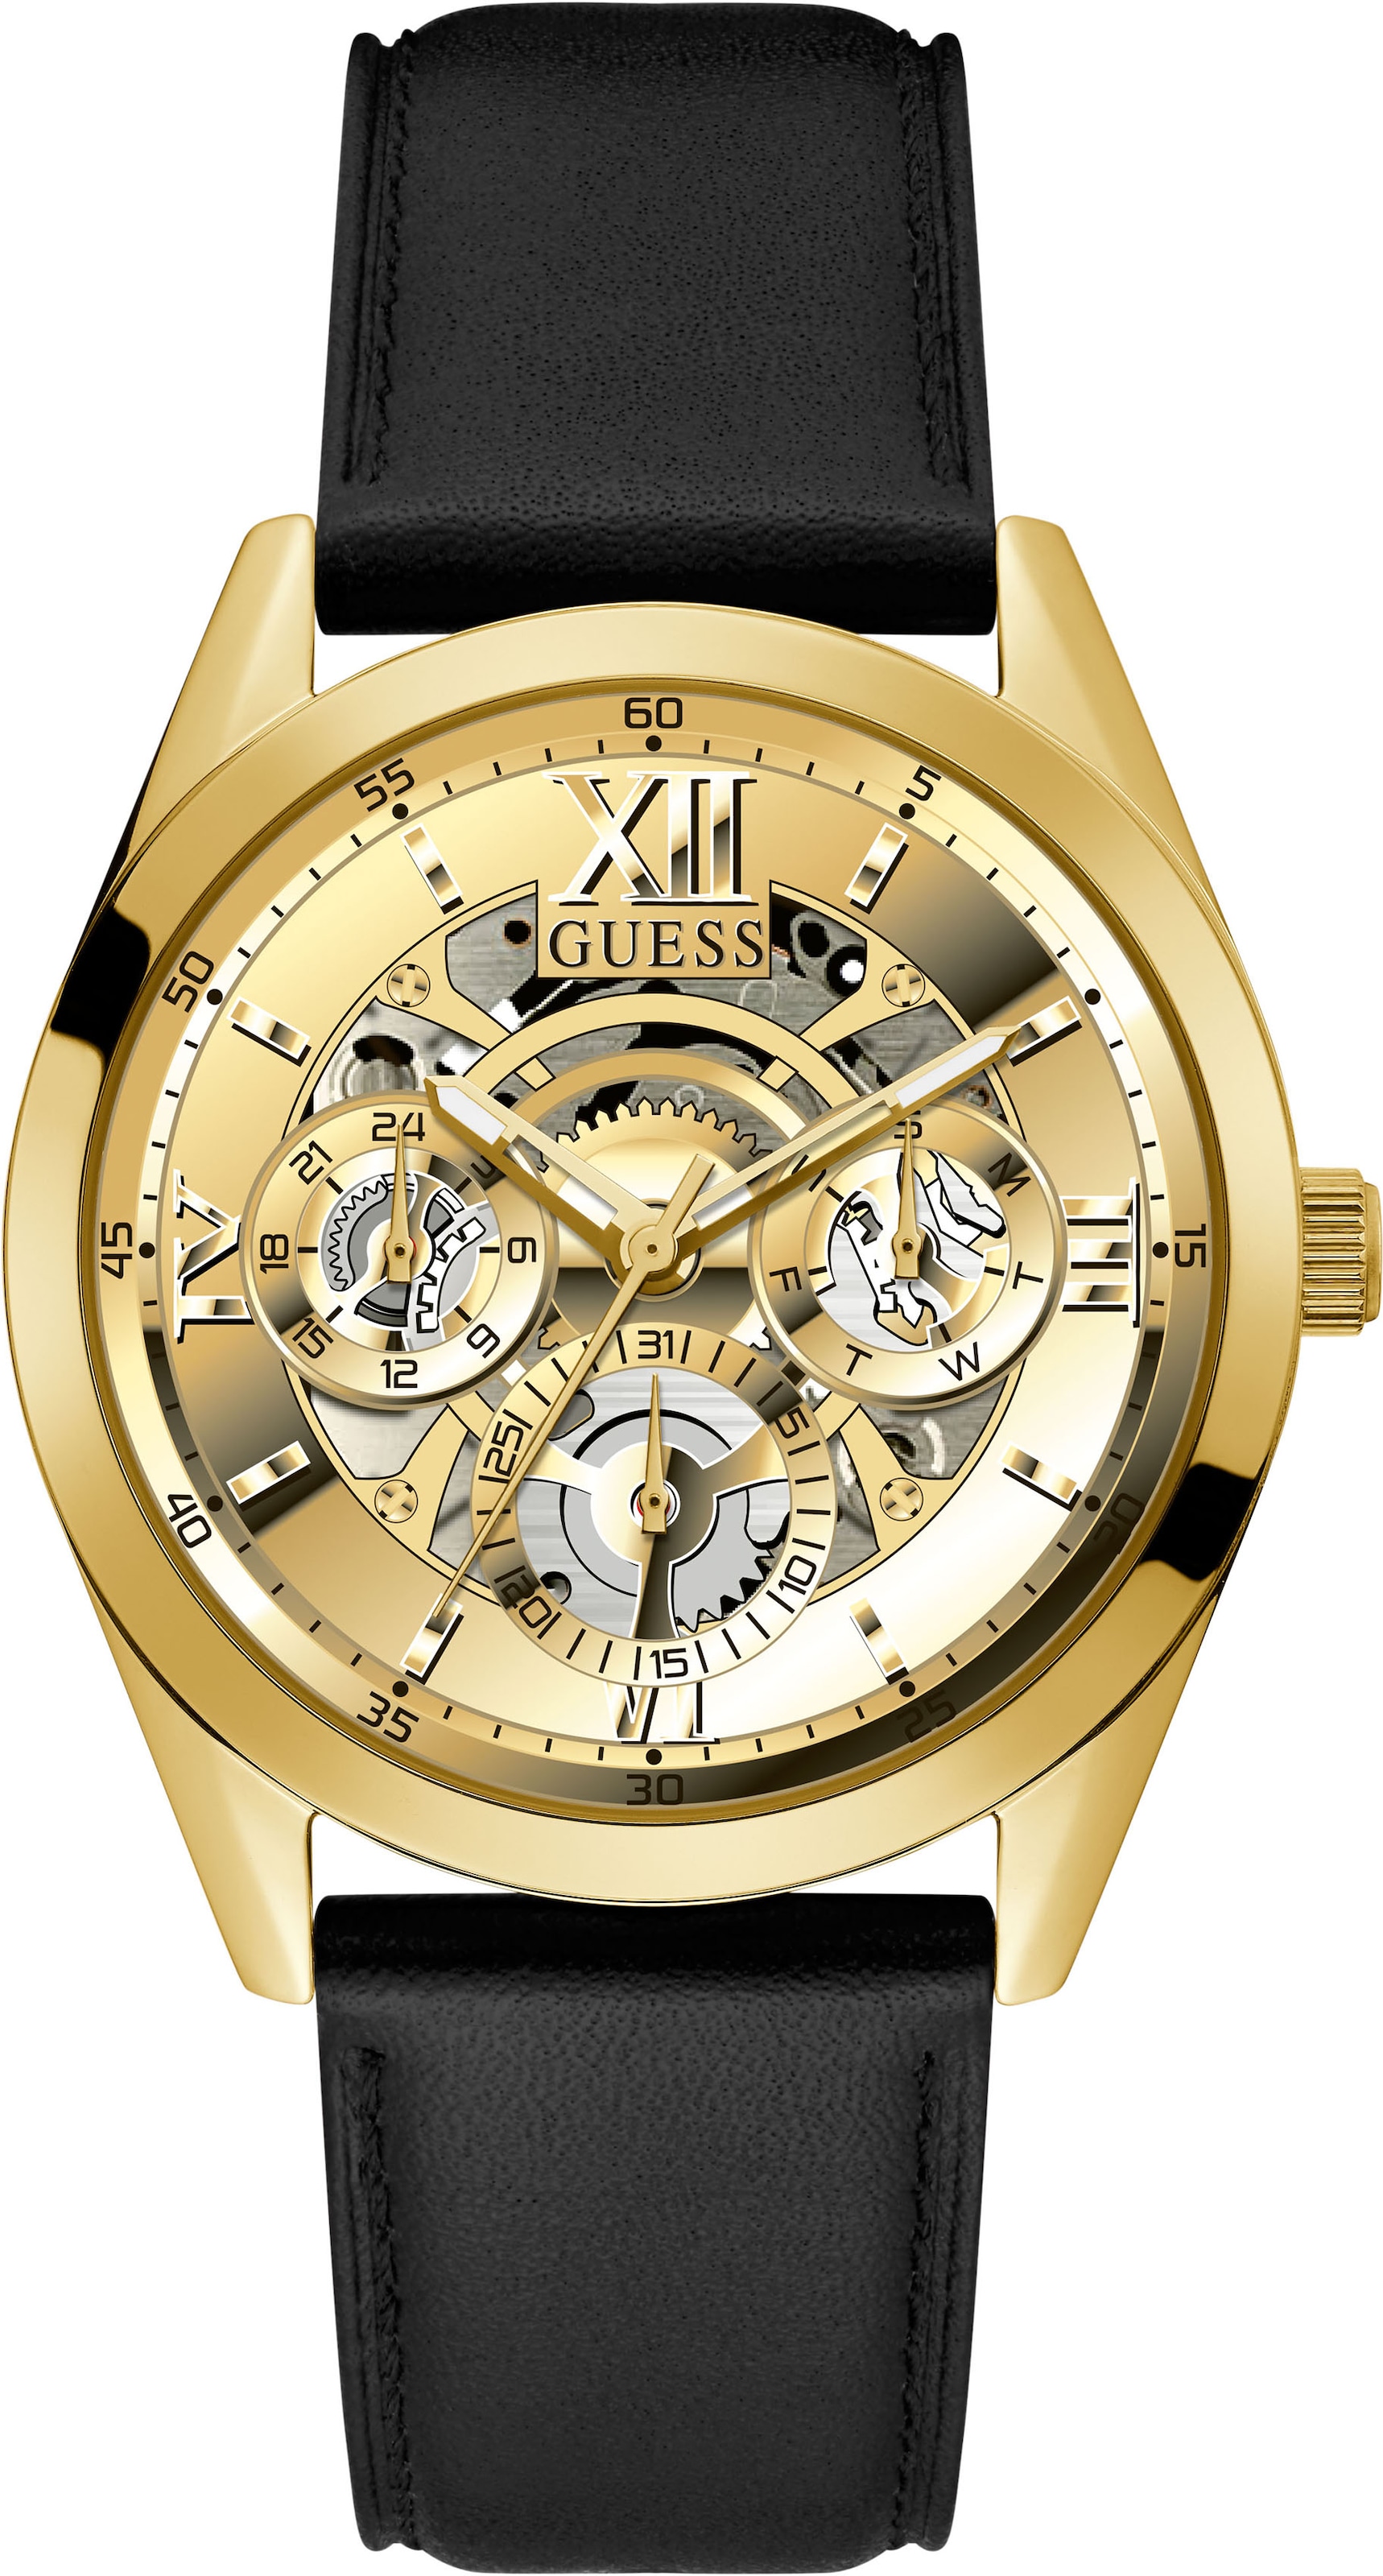 Guess Multifunktionsuhr »TAILOR, GW0389G2« kaufen | I\'m walking